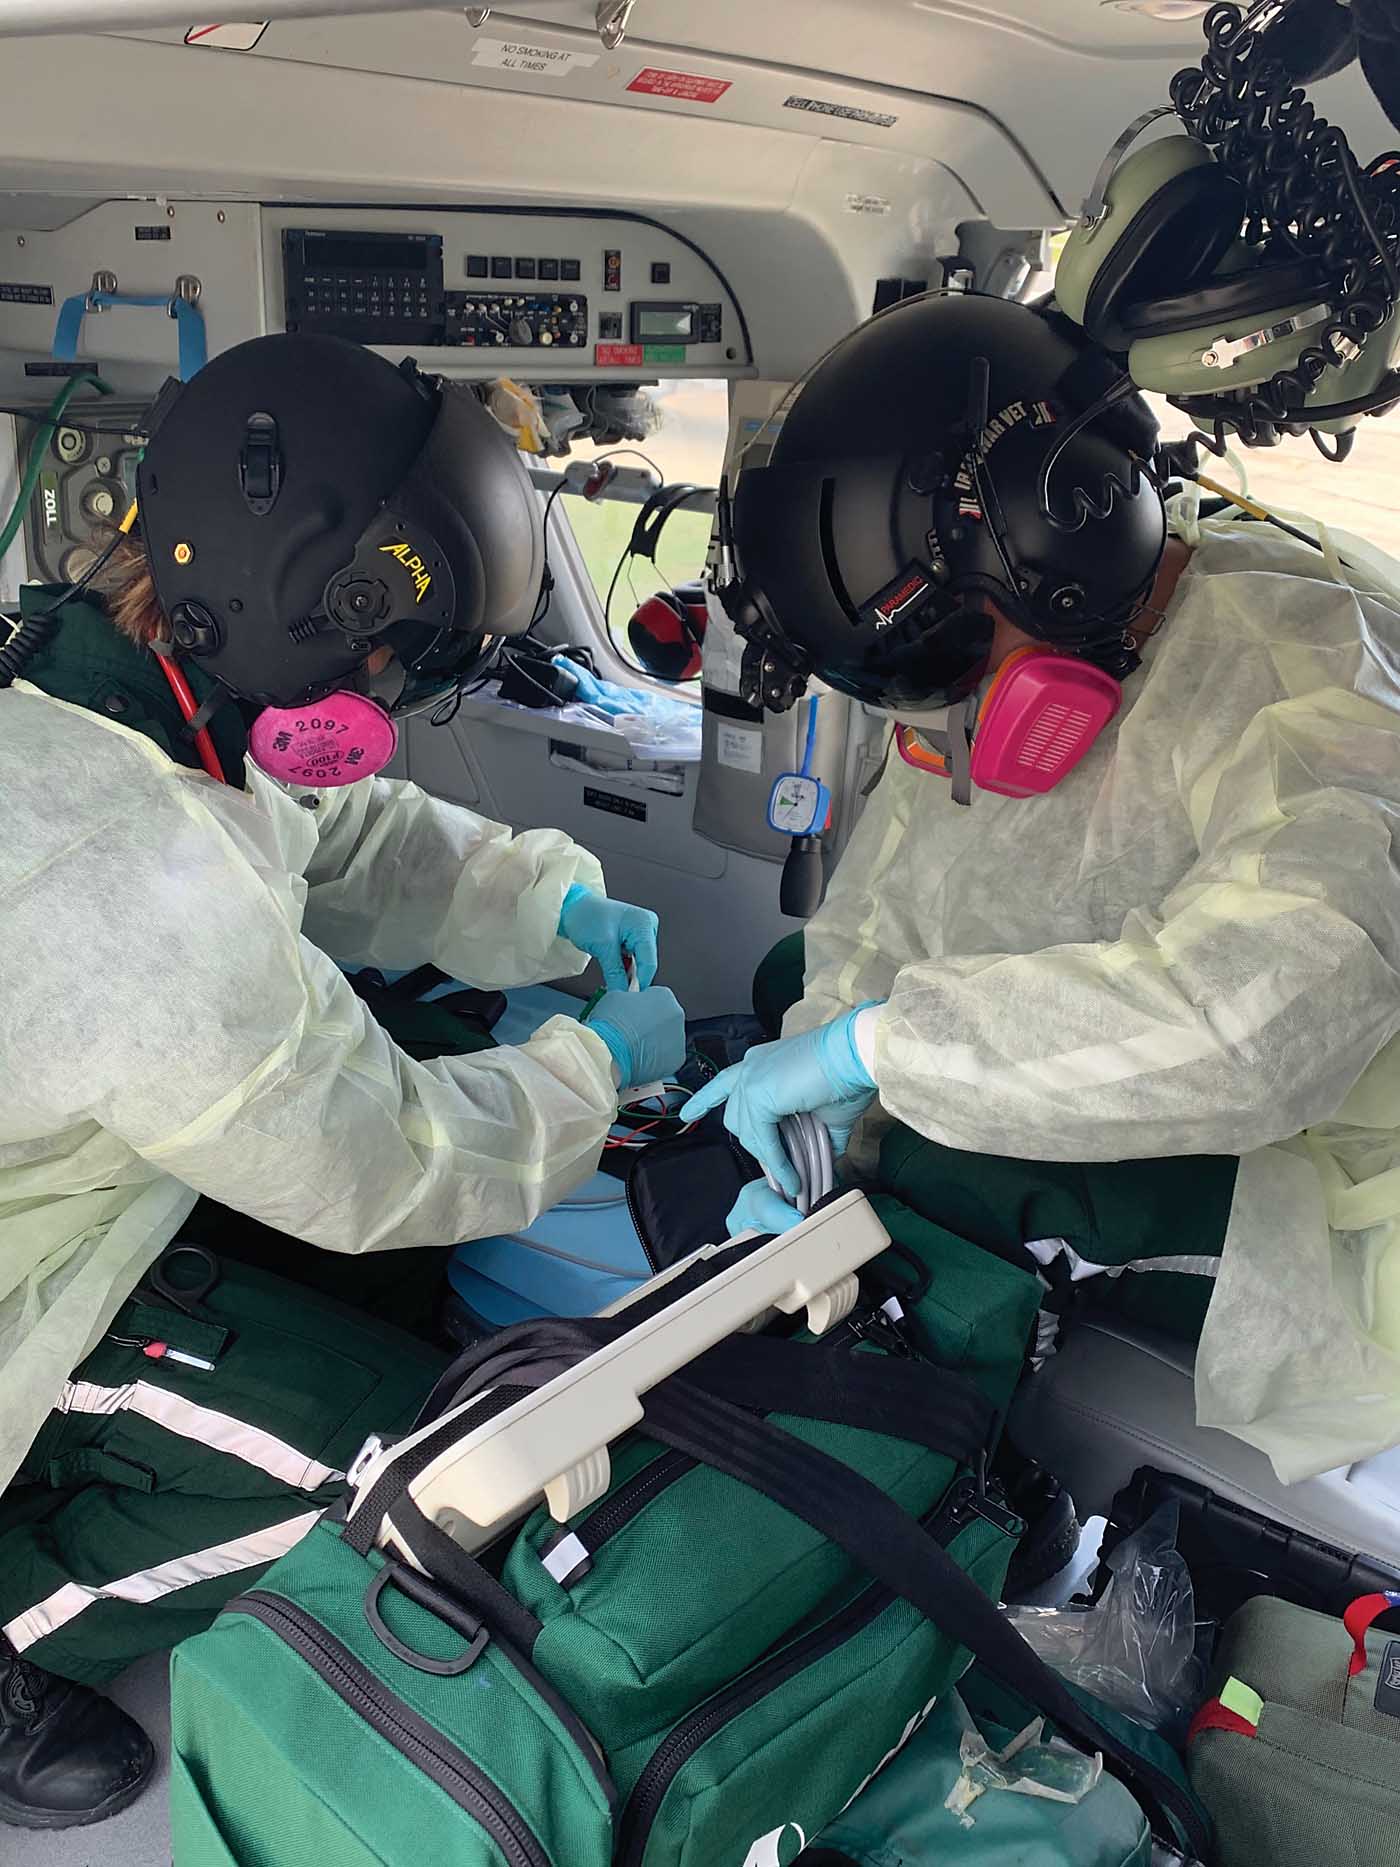 Acadian Air Med purchased 2,800 3M OV/P100 Respirators to protect their air and ground ambulance medical crews. Acadian Air Med Photo